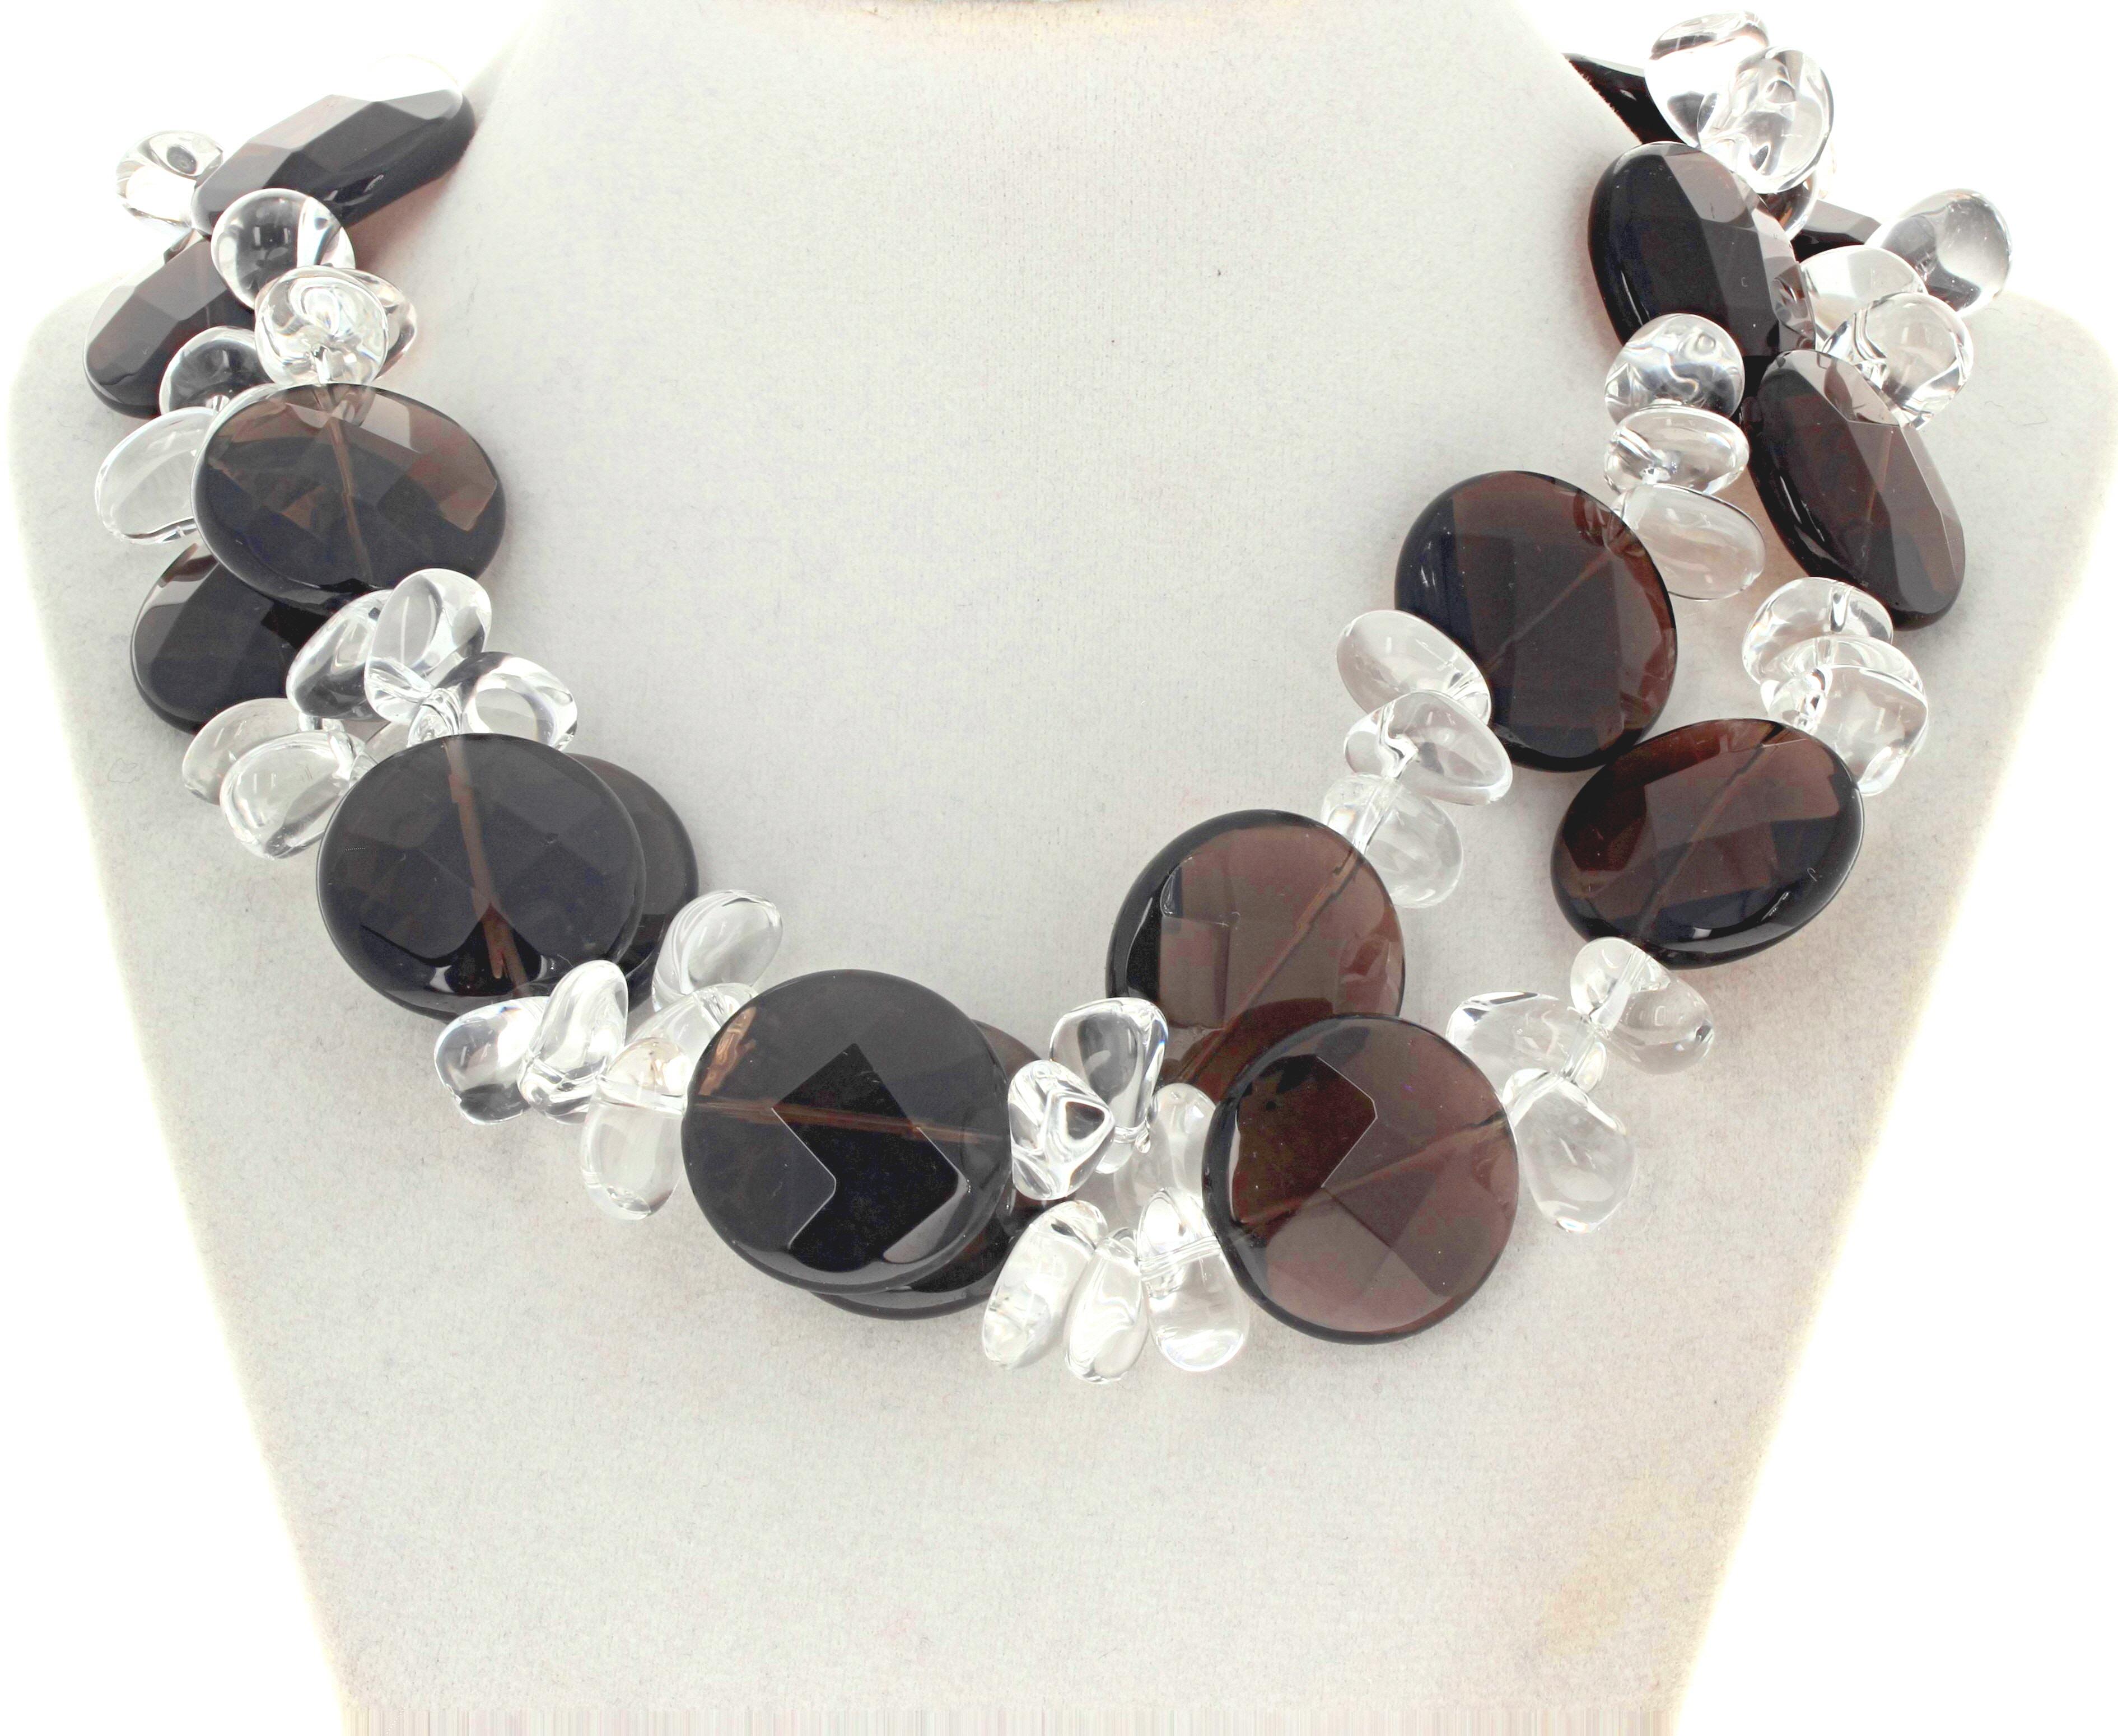 This double strand of glowing gem cut natural Smoky Quartz (approximately 25mm) is enhanced with highly polished chunks of translucent glowing smooth silvery white Quartz gem stones.  The cut and polish of these beautiful Smoky Quartz is very